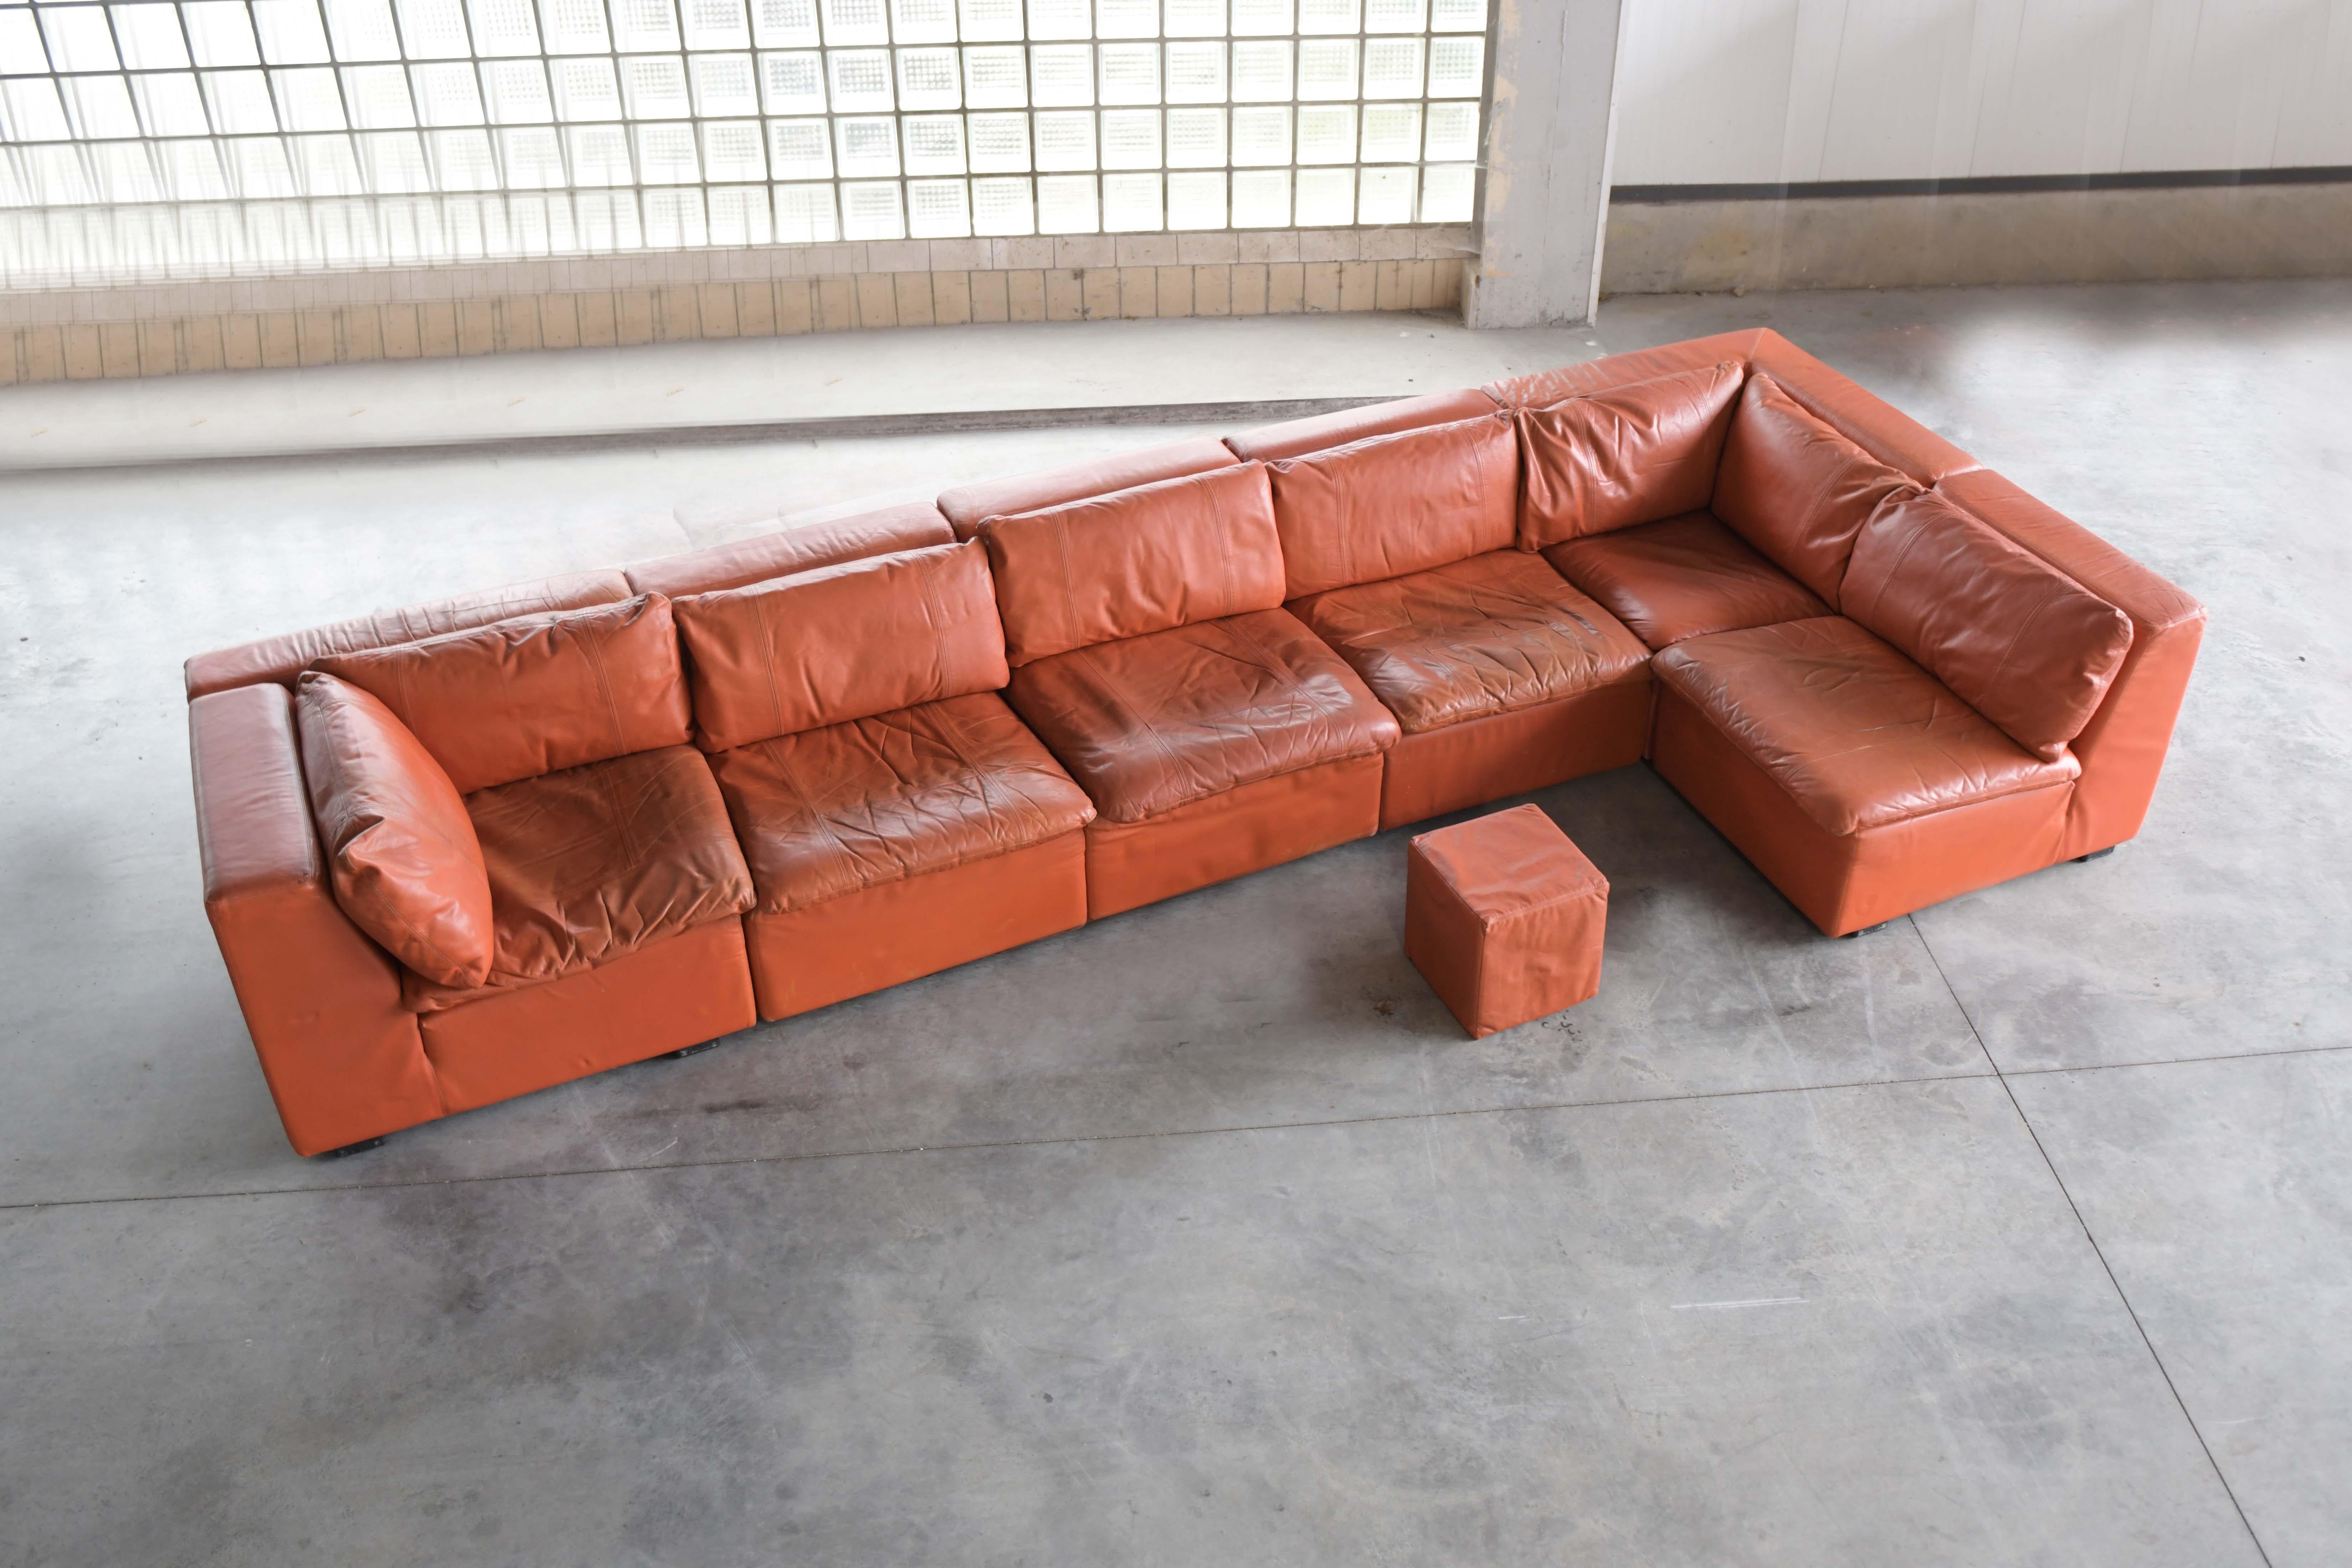 Very rare modular sofa in his original orange leather. 
With labels and printed name on the feet.

Nice vintage condition (check pictures)
Only sold as a set : 2 corners + 4 ‘1-seats’ + poof + 3 cushions.